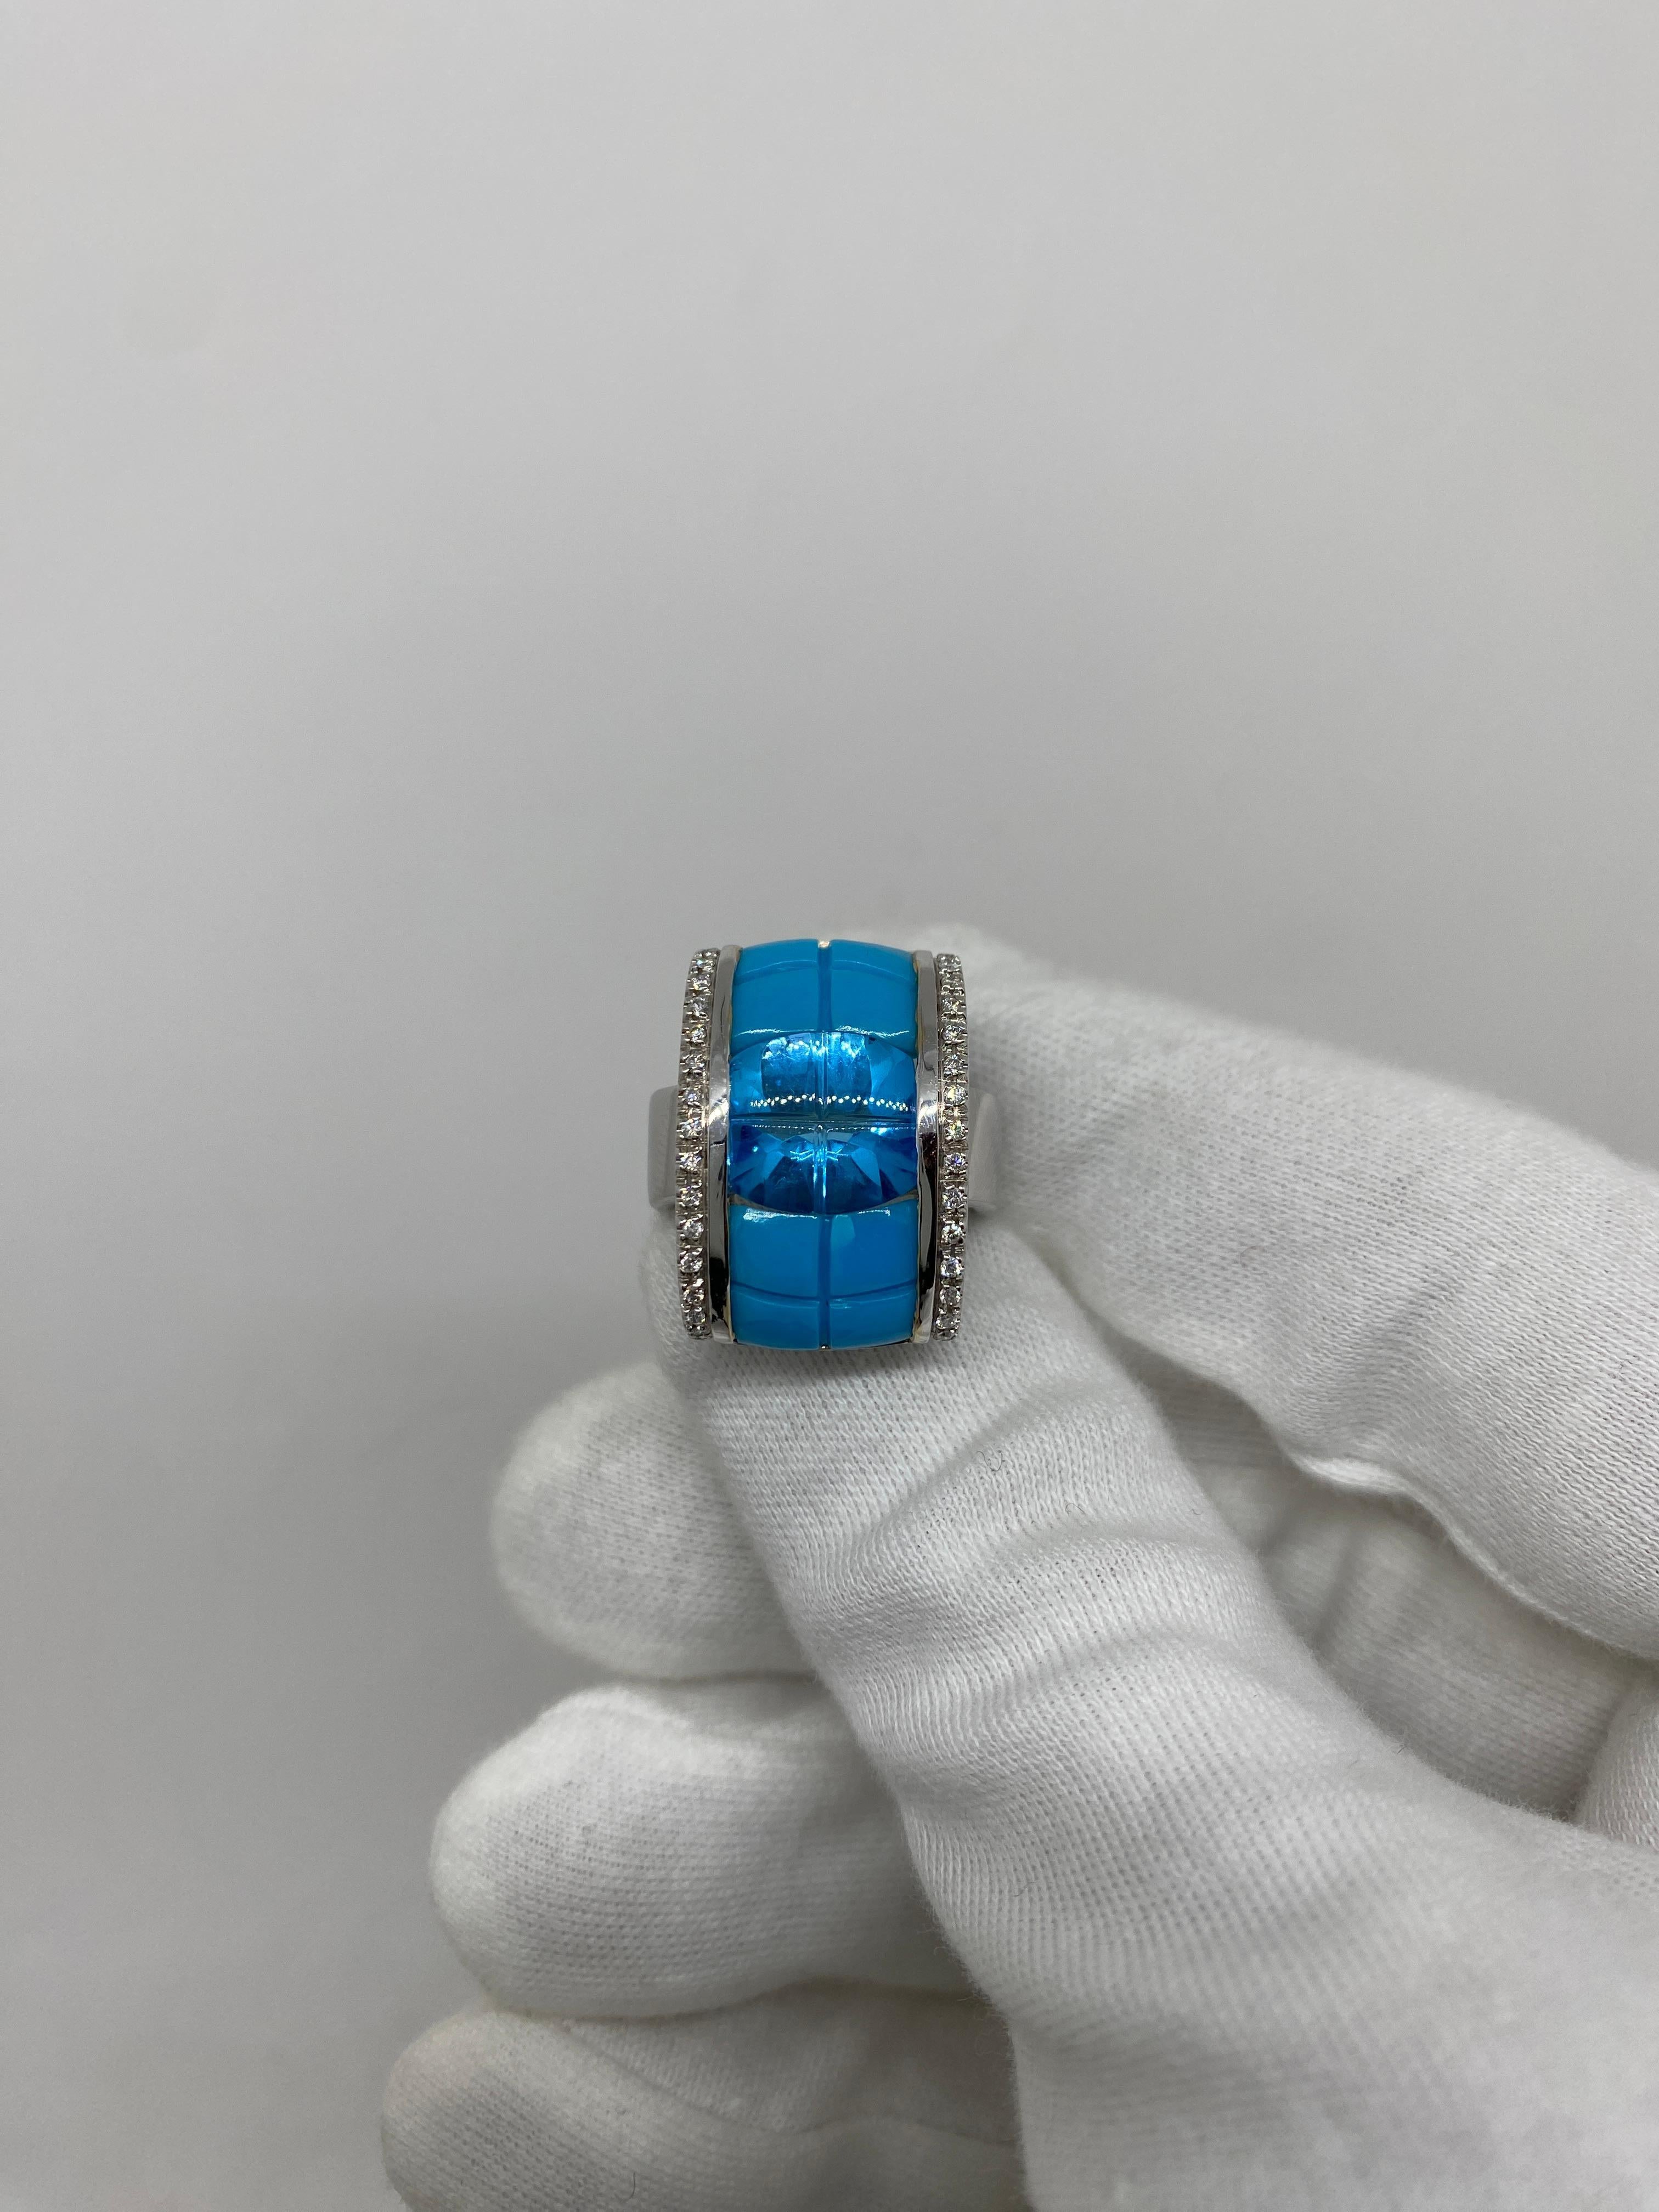 Ring made of 18kt white gold with turquoise for ct . 7.50 and topaz for ct .4.00 and natural brilliant-cut diamonds for ct.0.22

Welcome to our jewelry collection, where every piece tells a story of timeless elegance and unparalleled craftsmanship.